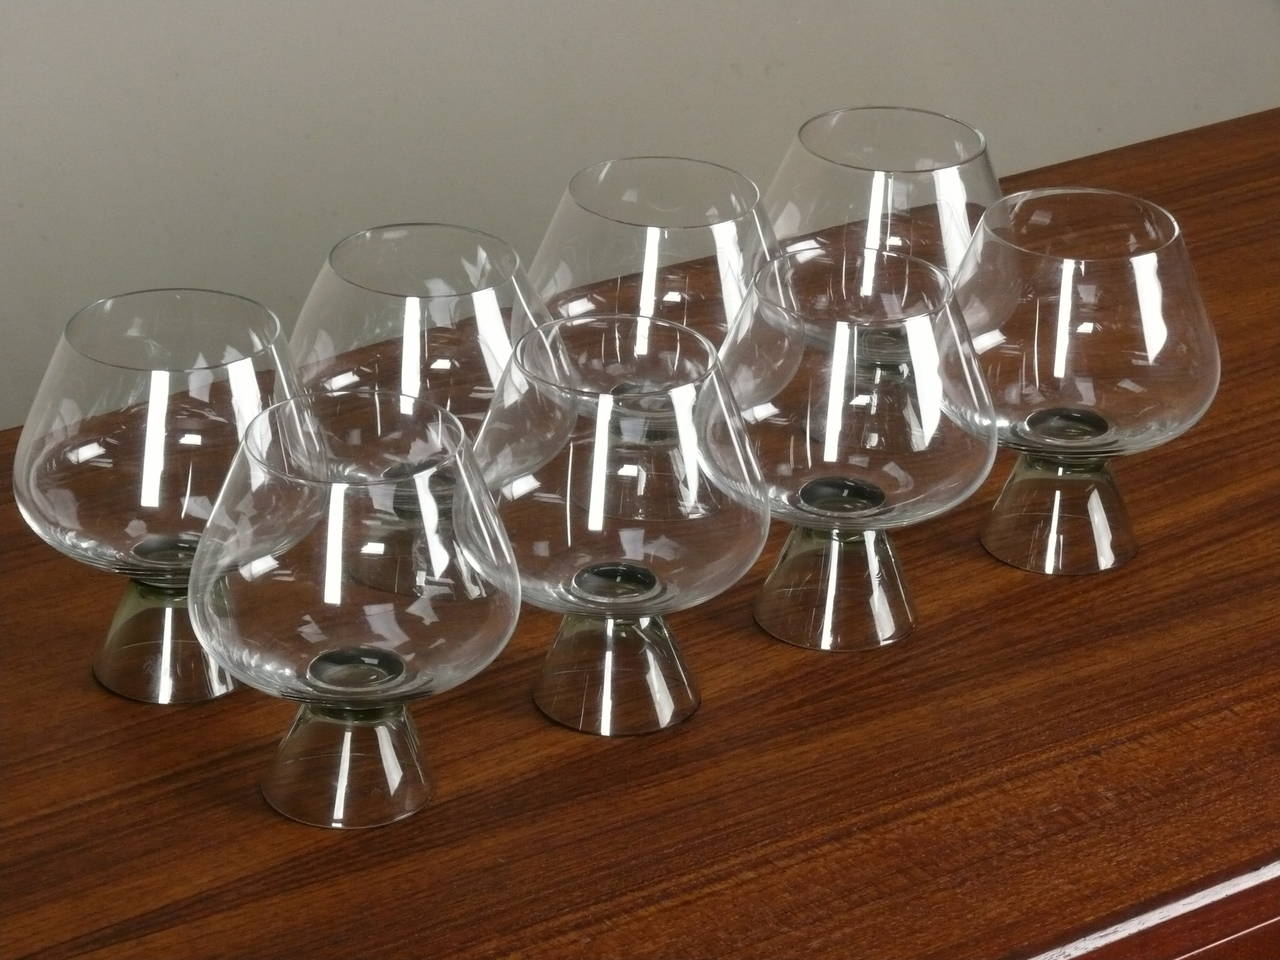 Mid-20th Century Crystal Brandy Snifters by Elsa Fischer-Treyden for Rosenthal